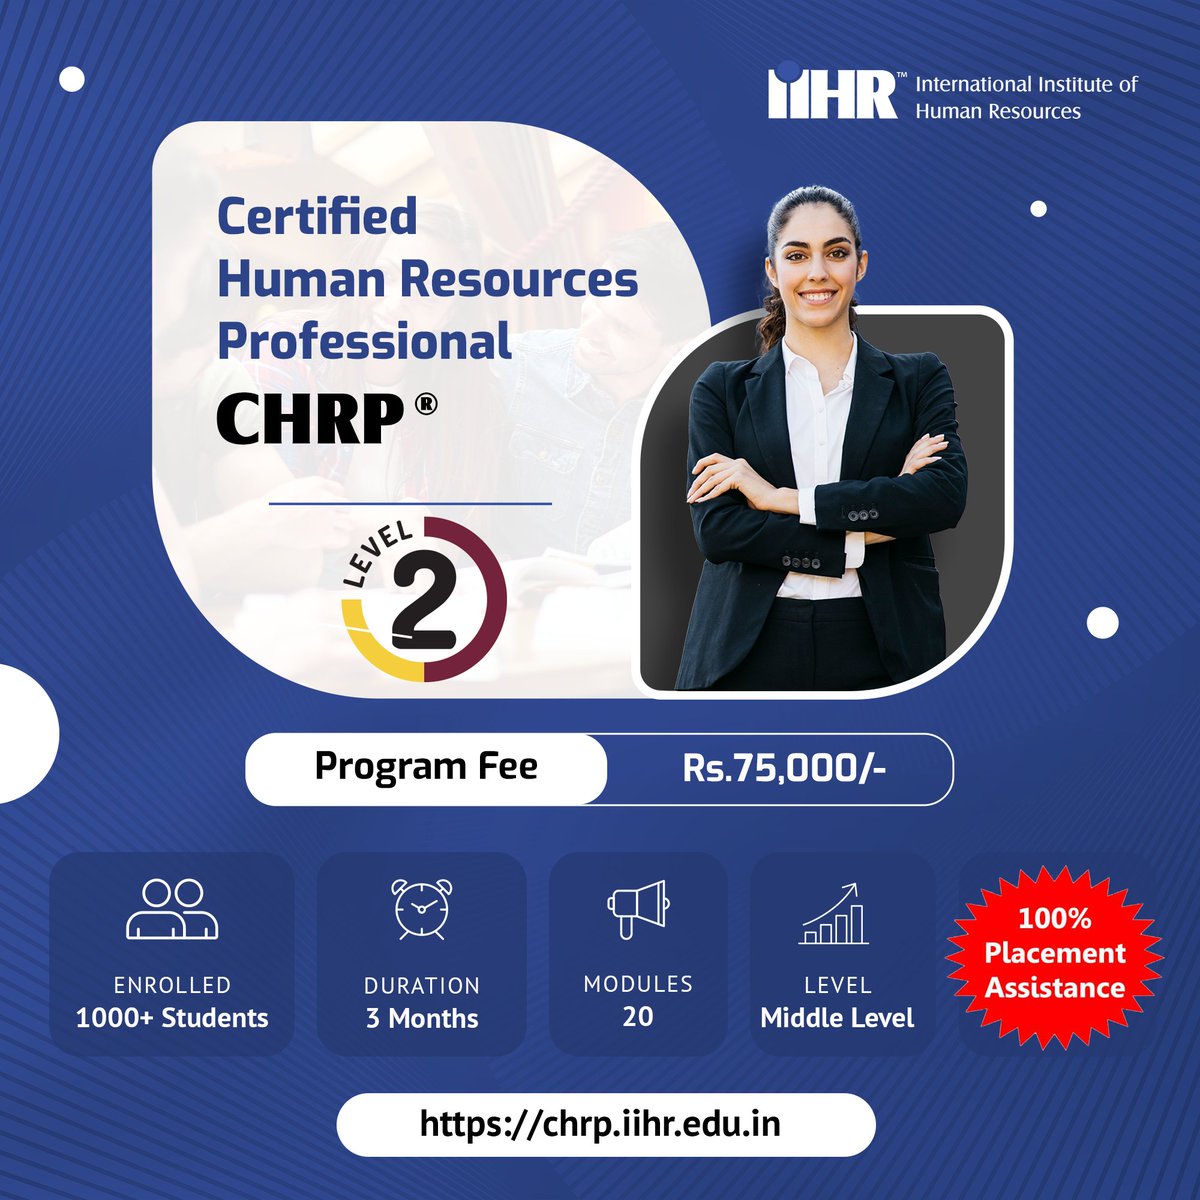 Elevate your HR journey with our 'Certified HR Professional' Program! 3 months of intensive training + 100% placement assistance. Explore more at chrp.iihr.edu.in or call/whatsapp 703 703 4447. #HRProfessional  #CareerGrowth#hrtraining #hrcourses #hrcertifications #iihr